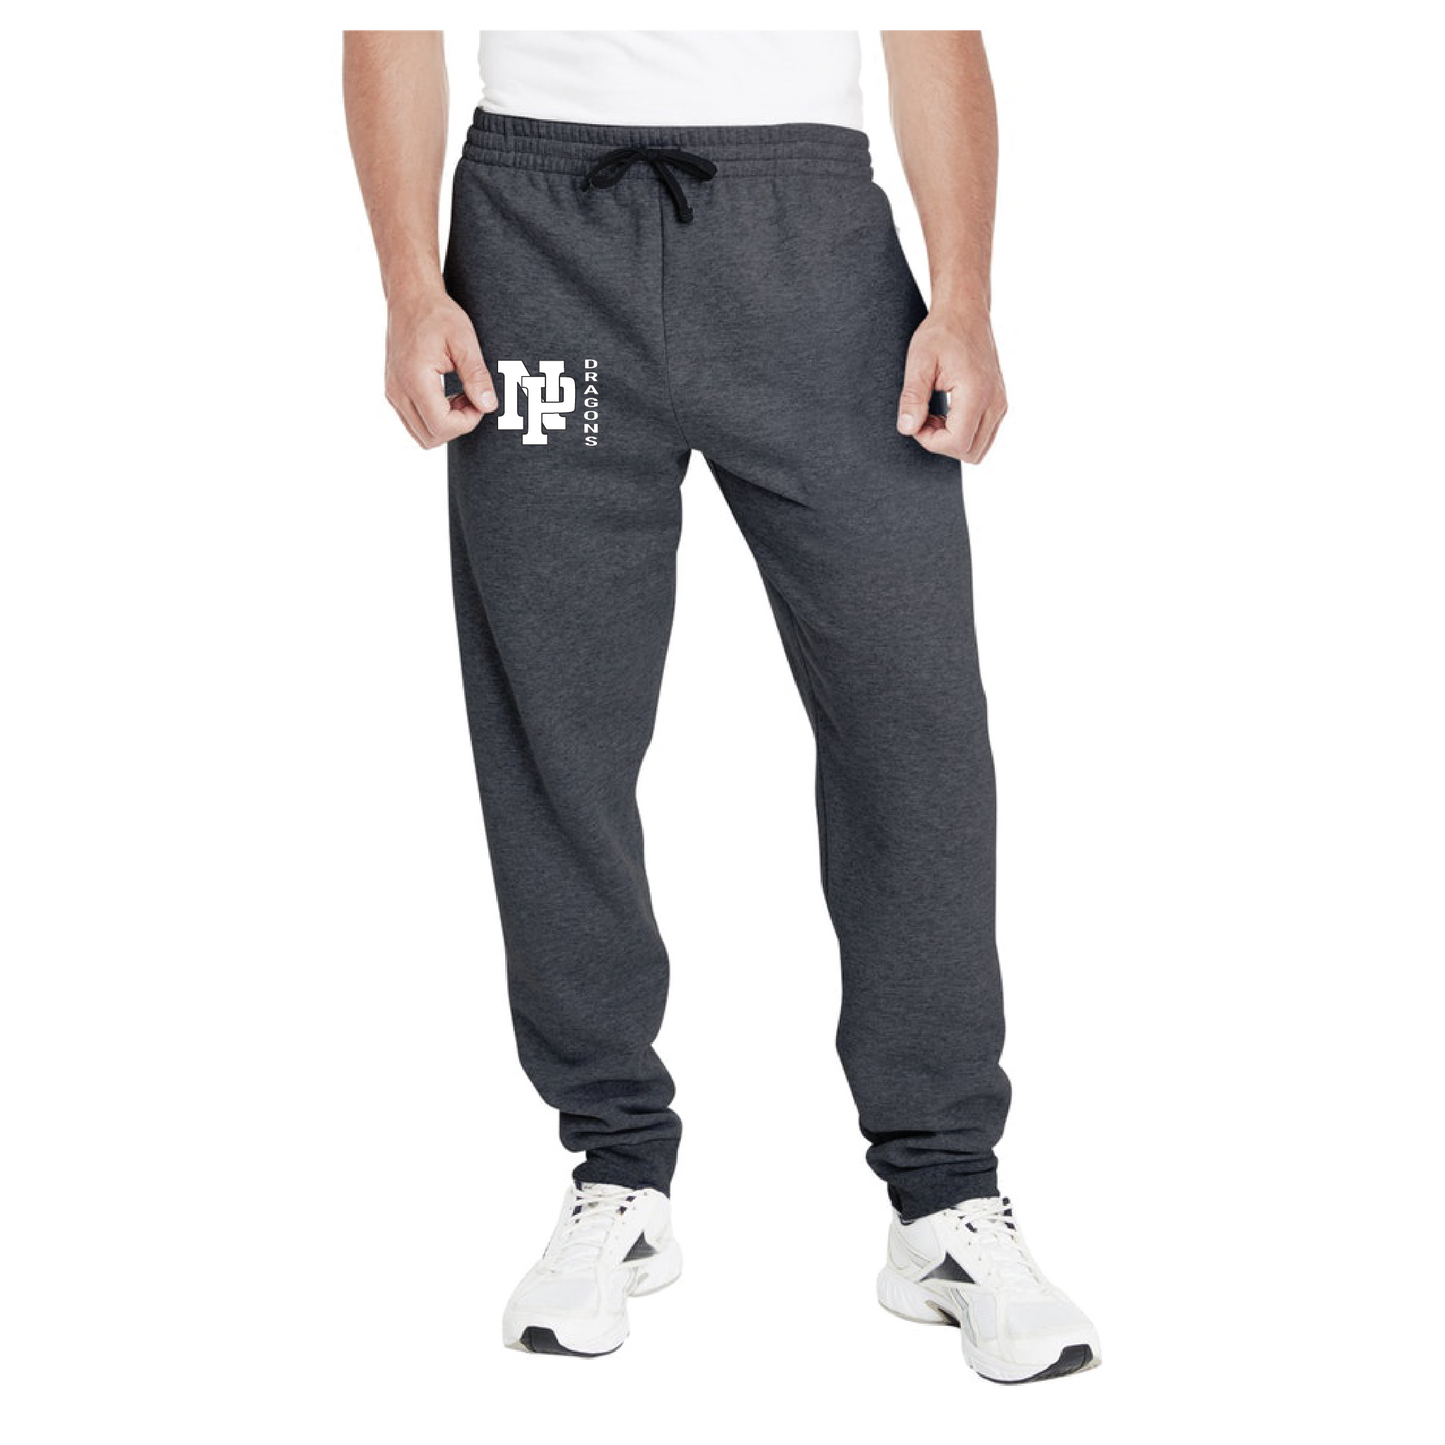 Adult Unisex Joggers - White NP Dragons, Side by Side